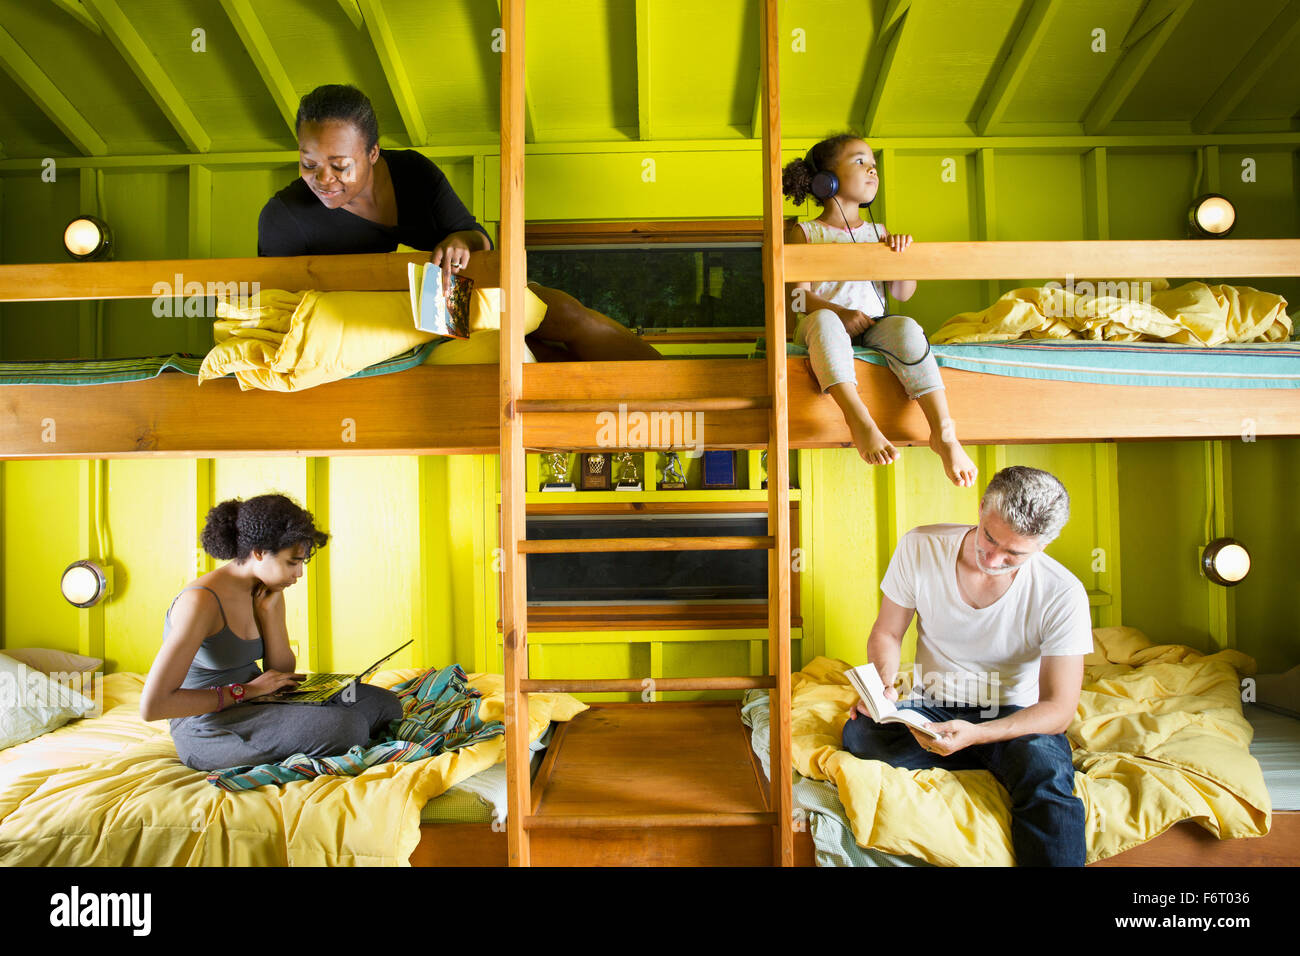 Family relaxing in bunk beds at camp Stock Photo